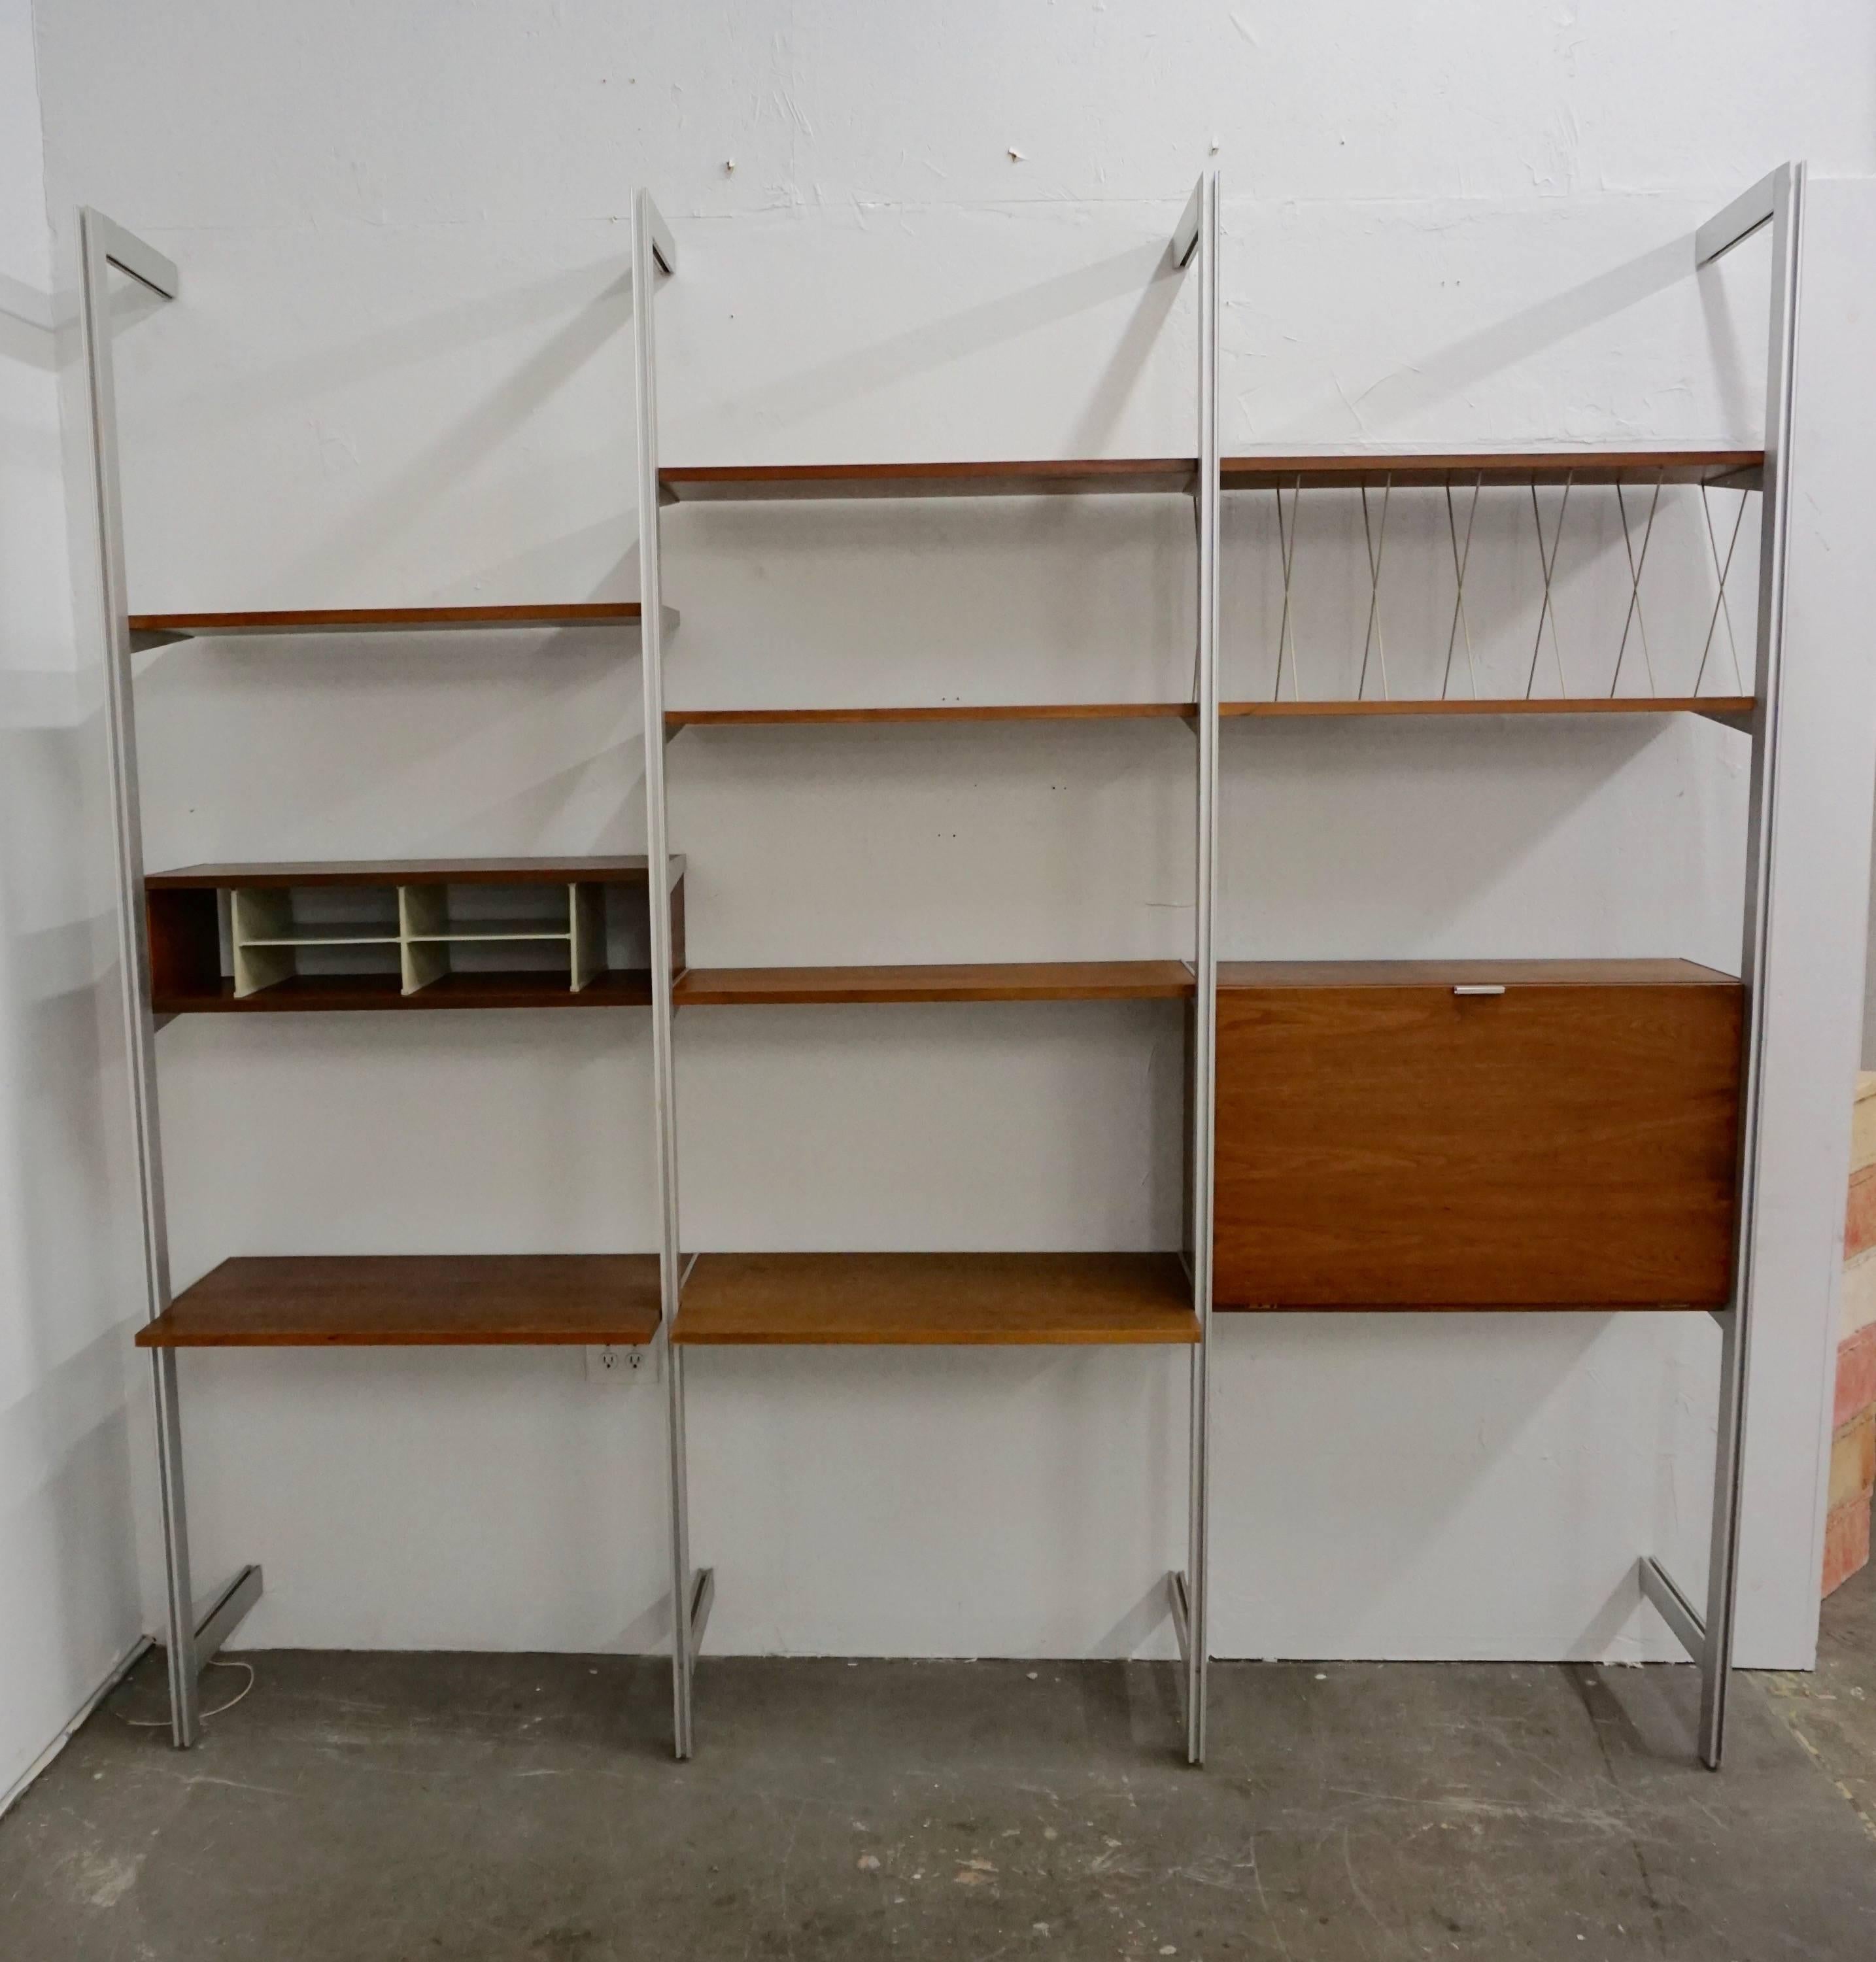 Manufactured by Herman Miller.
Consisting of:
Four aluminum poles with two crossbars each.
One drop down desk.
One record holder for LP's.
One slotted cabinet.
Six shelves.
Walnut veneered components.